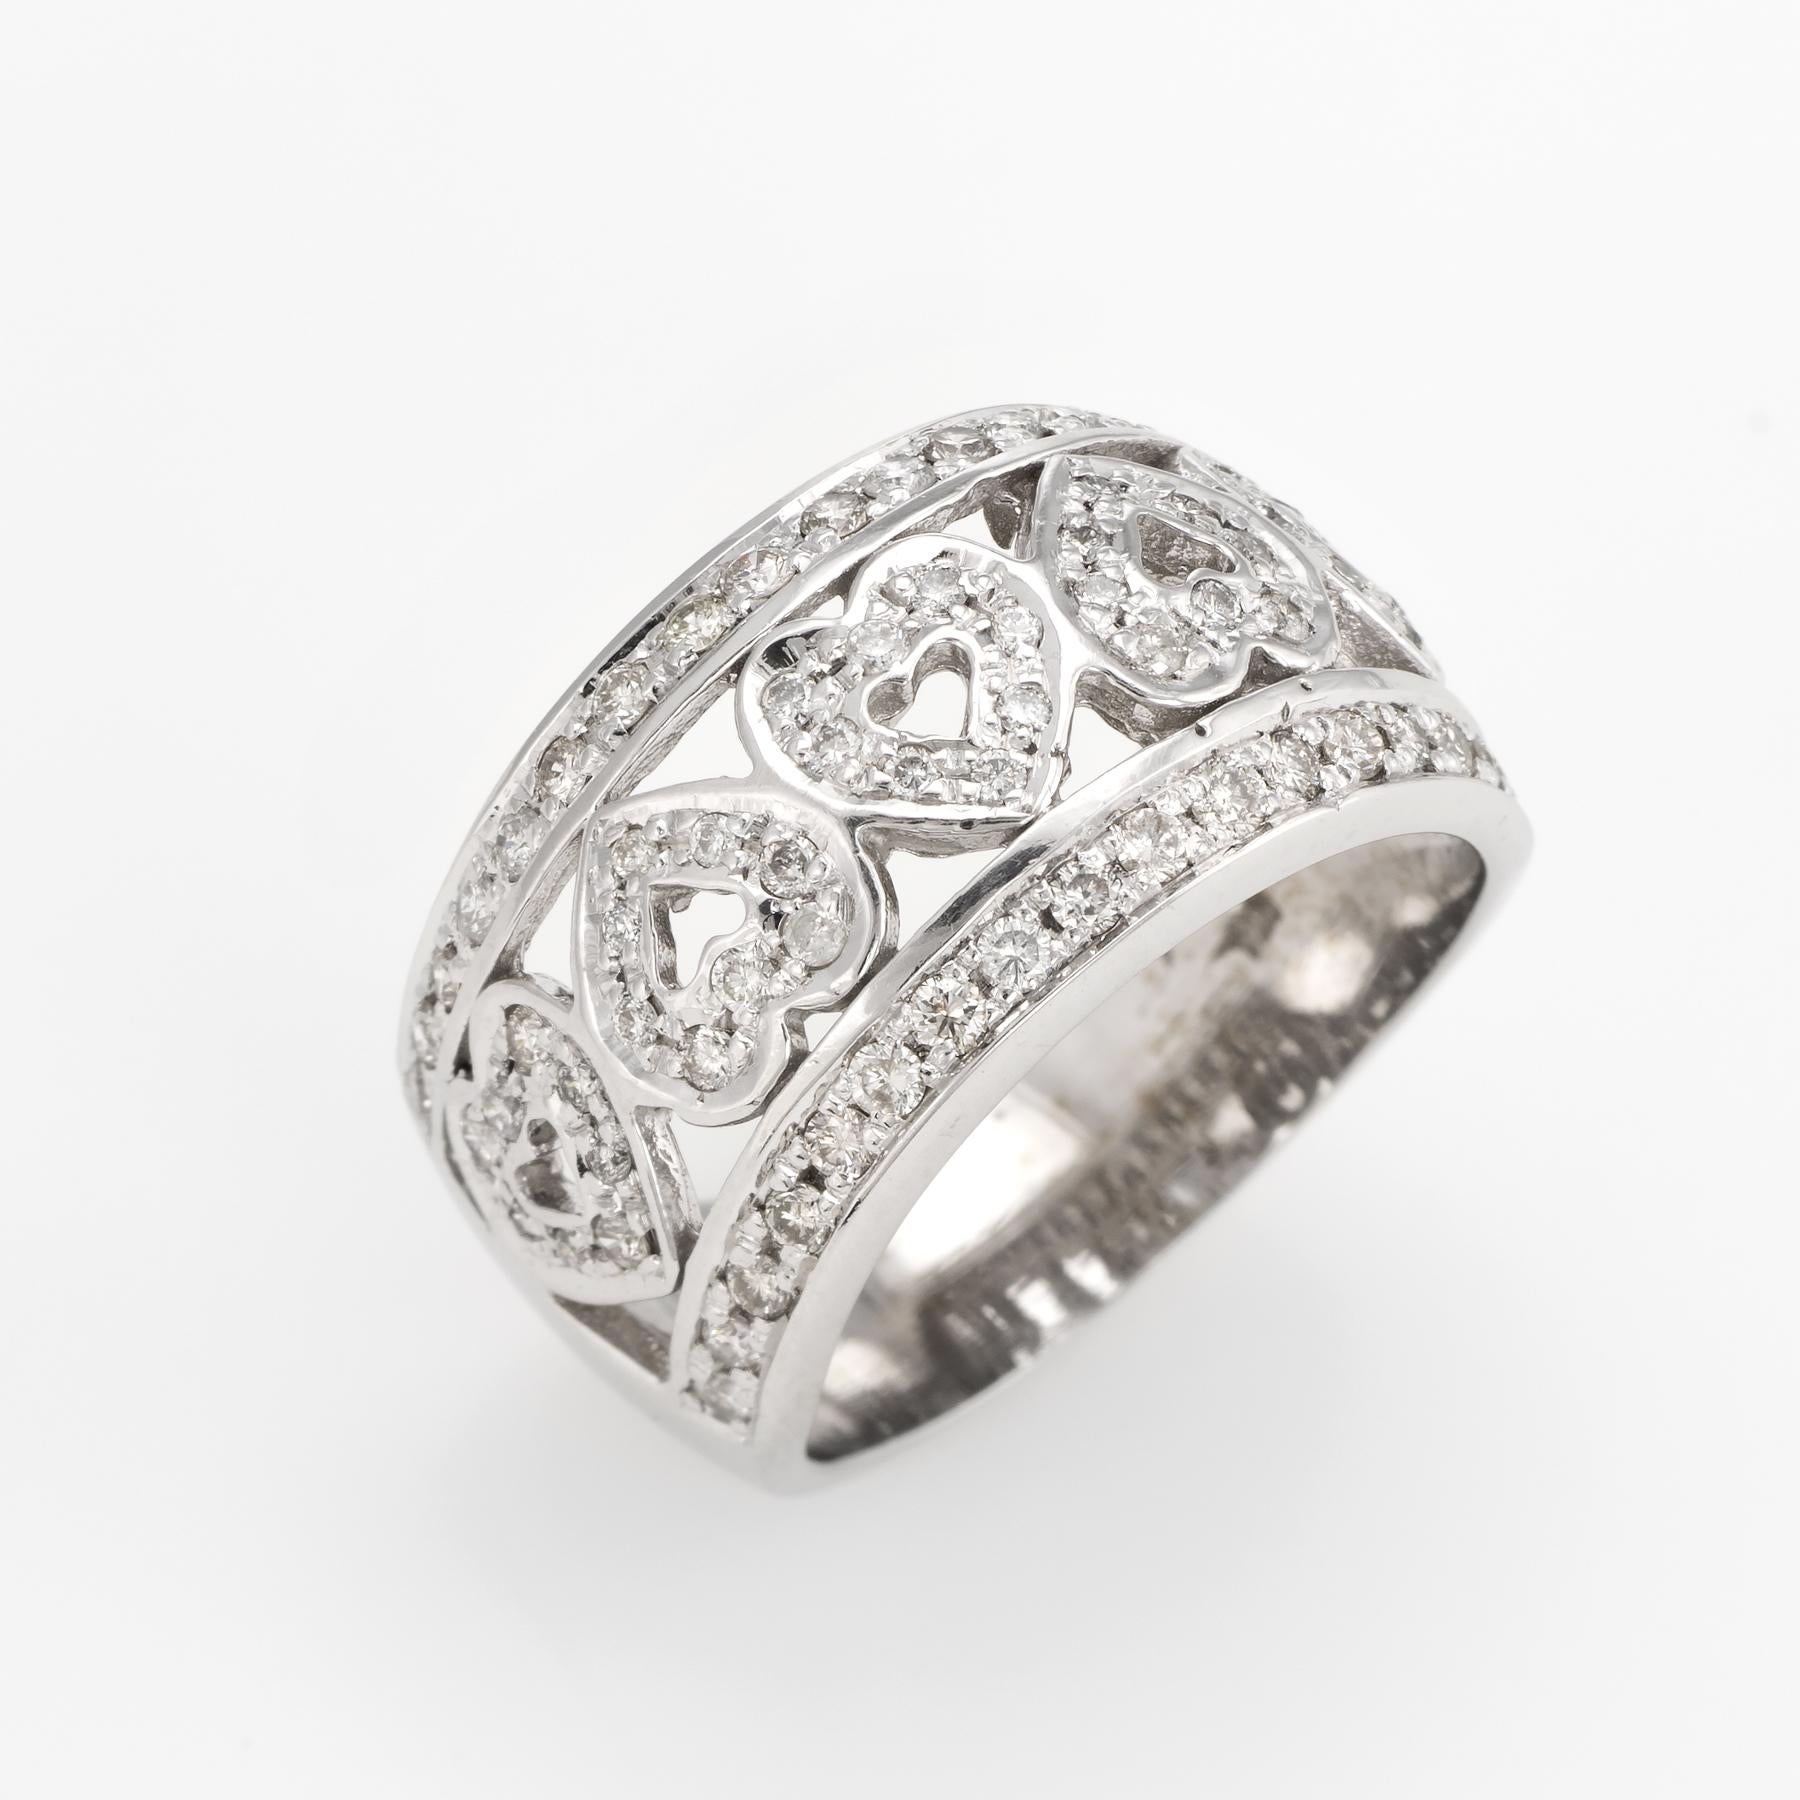 Finely detailed estate diamond heart ring, crafted in 14 karat white gold. 

Round brilliant cut diamonds total an estimated 0.76 carats (estimated at I color and I1 clarity). 

The 5 hearts are set in opposing form adding visual interest to the